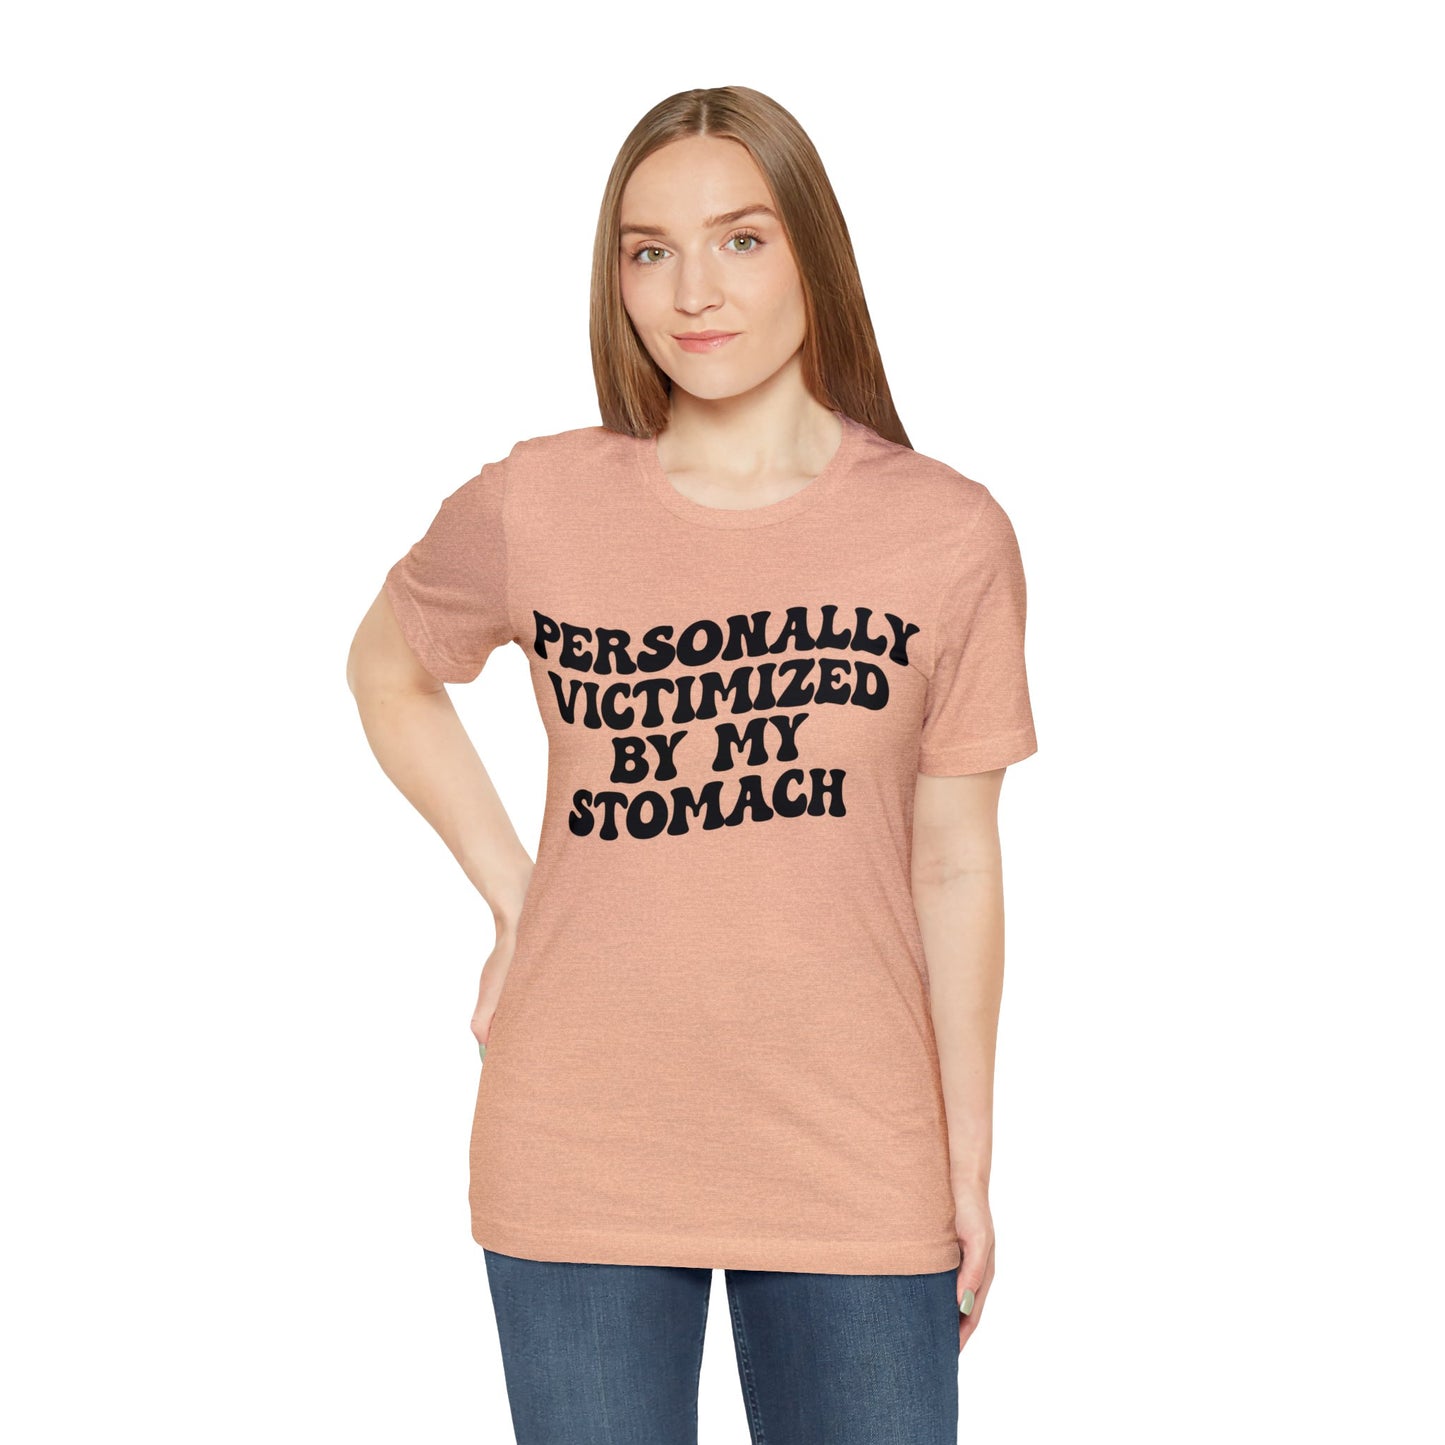 Personally Victimized By My Stomach Shirt, Funny Shirt for Women, Gift for Mom, Funny Tummy Hurts Shirt, Chronic Illness Shirt, T1102